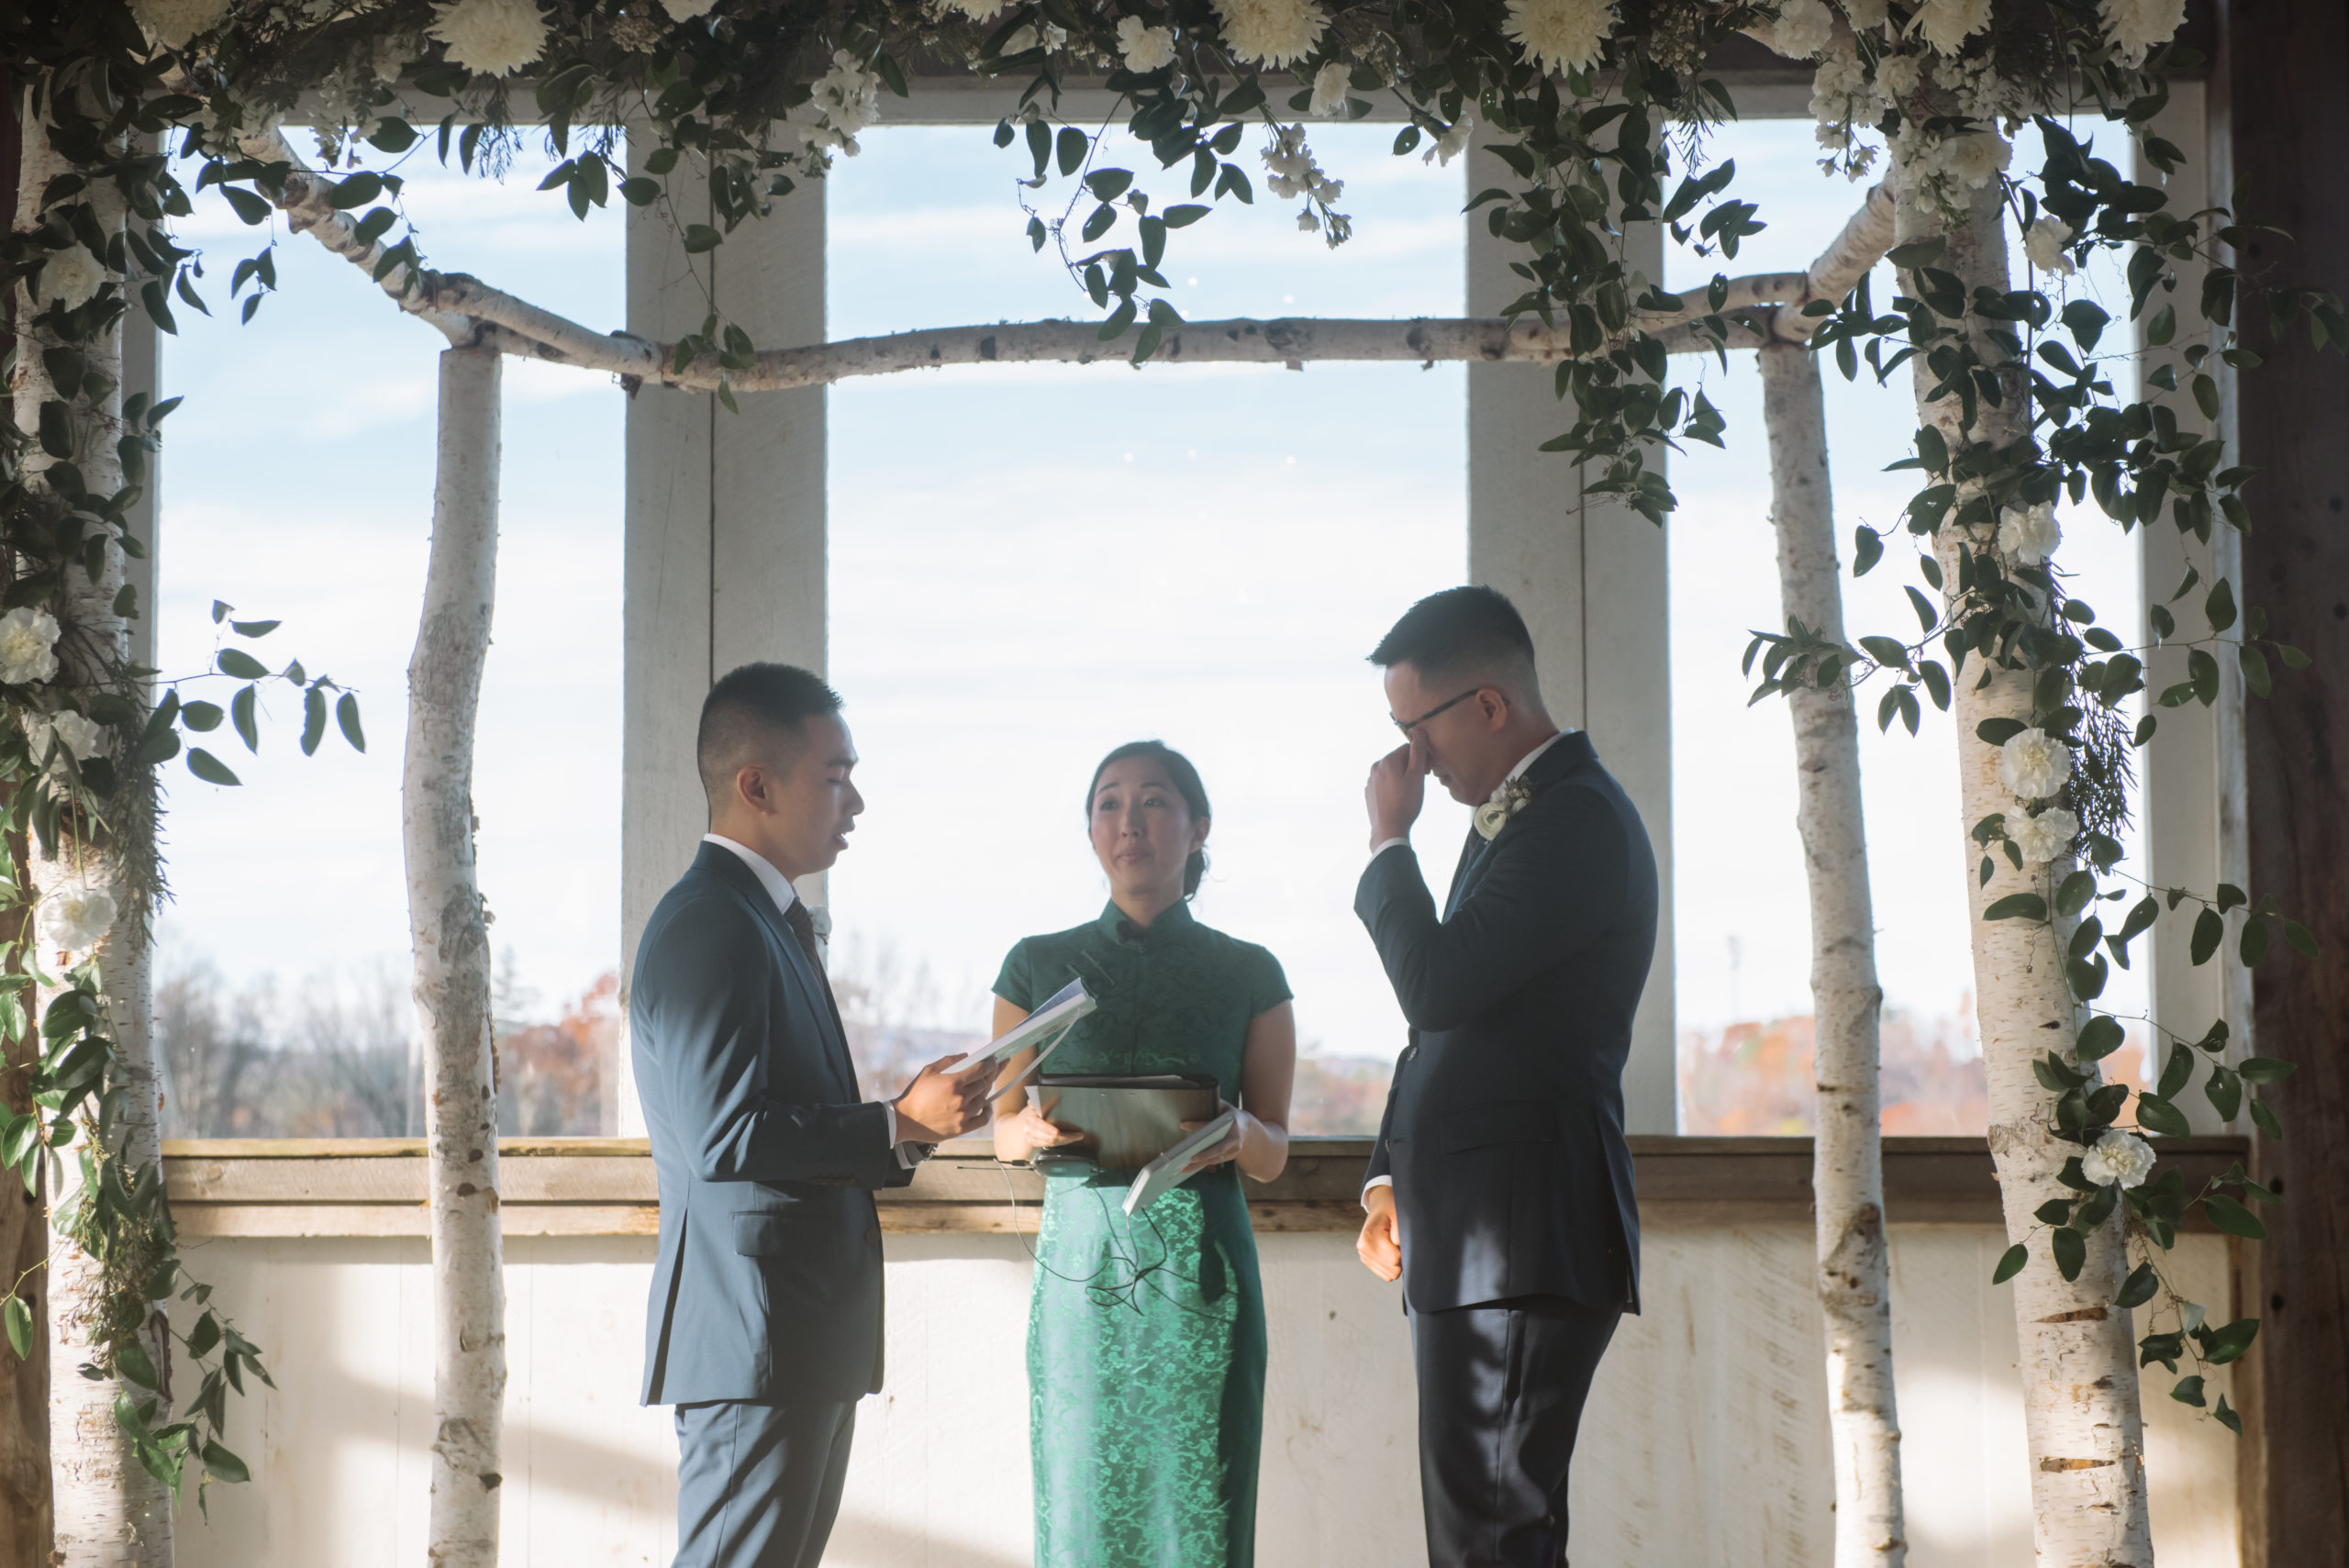 Two grooms mid-ceremony. One is reading his vows and the other is wiping away tears. The officiant is looking towards the groom who is reciting his vows. She is dressed in a green qi pao and the grooms are dressed in two different shades of dark blue suits. The alter is decorated with birch trees, greenery, and white florals.